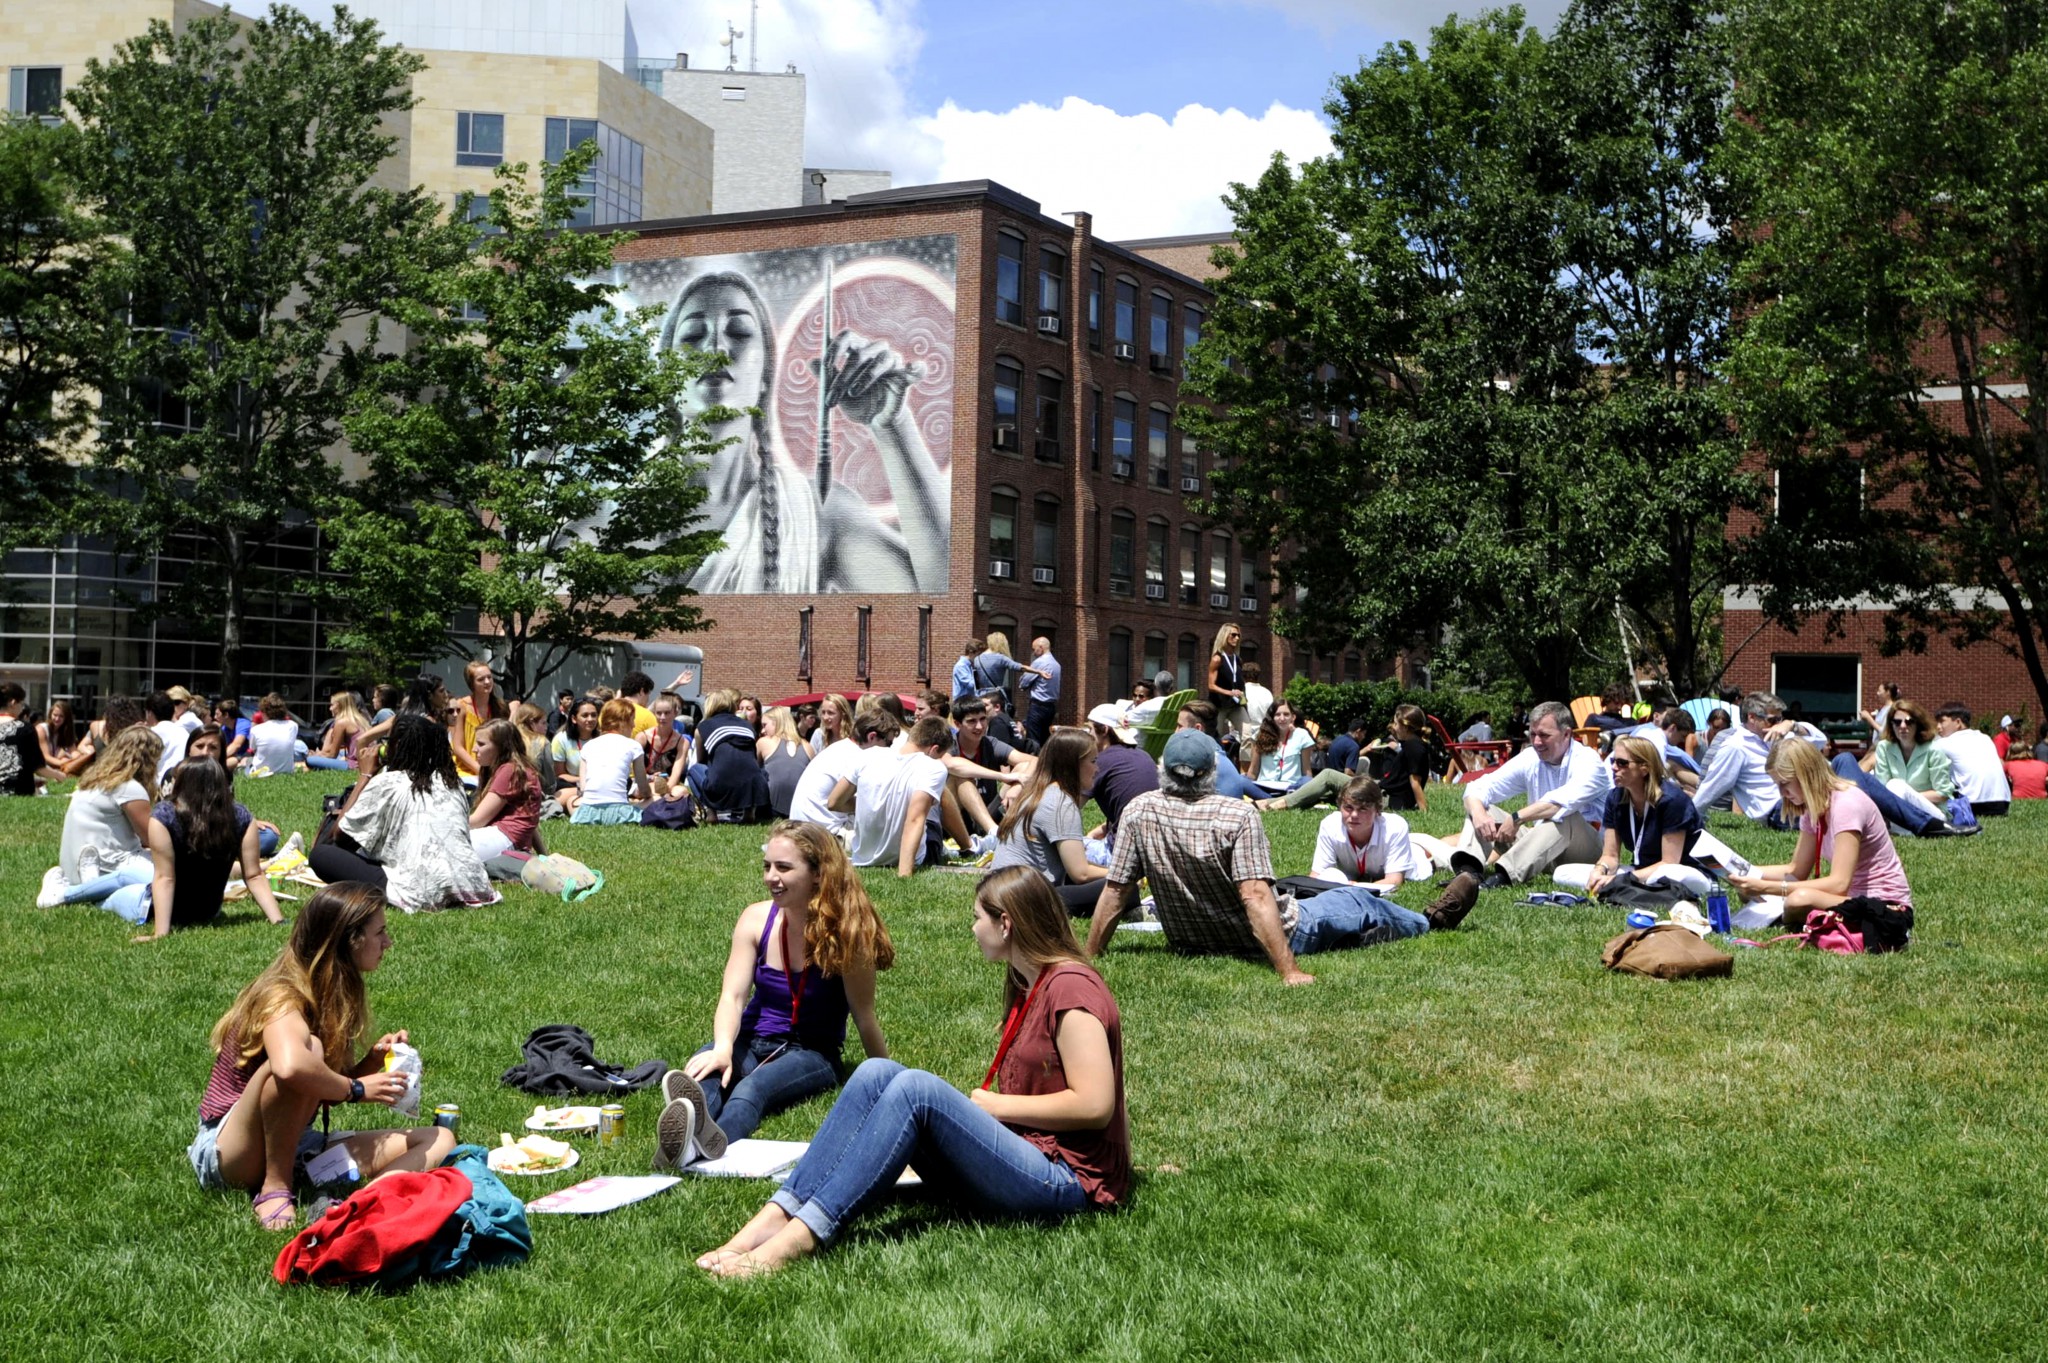 Lots of students hanging out in a grassy area. There is a building in the background with a mural painted on the wall.